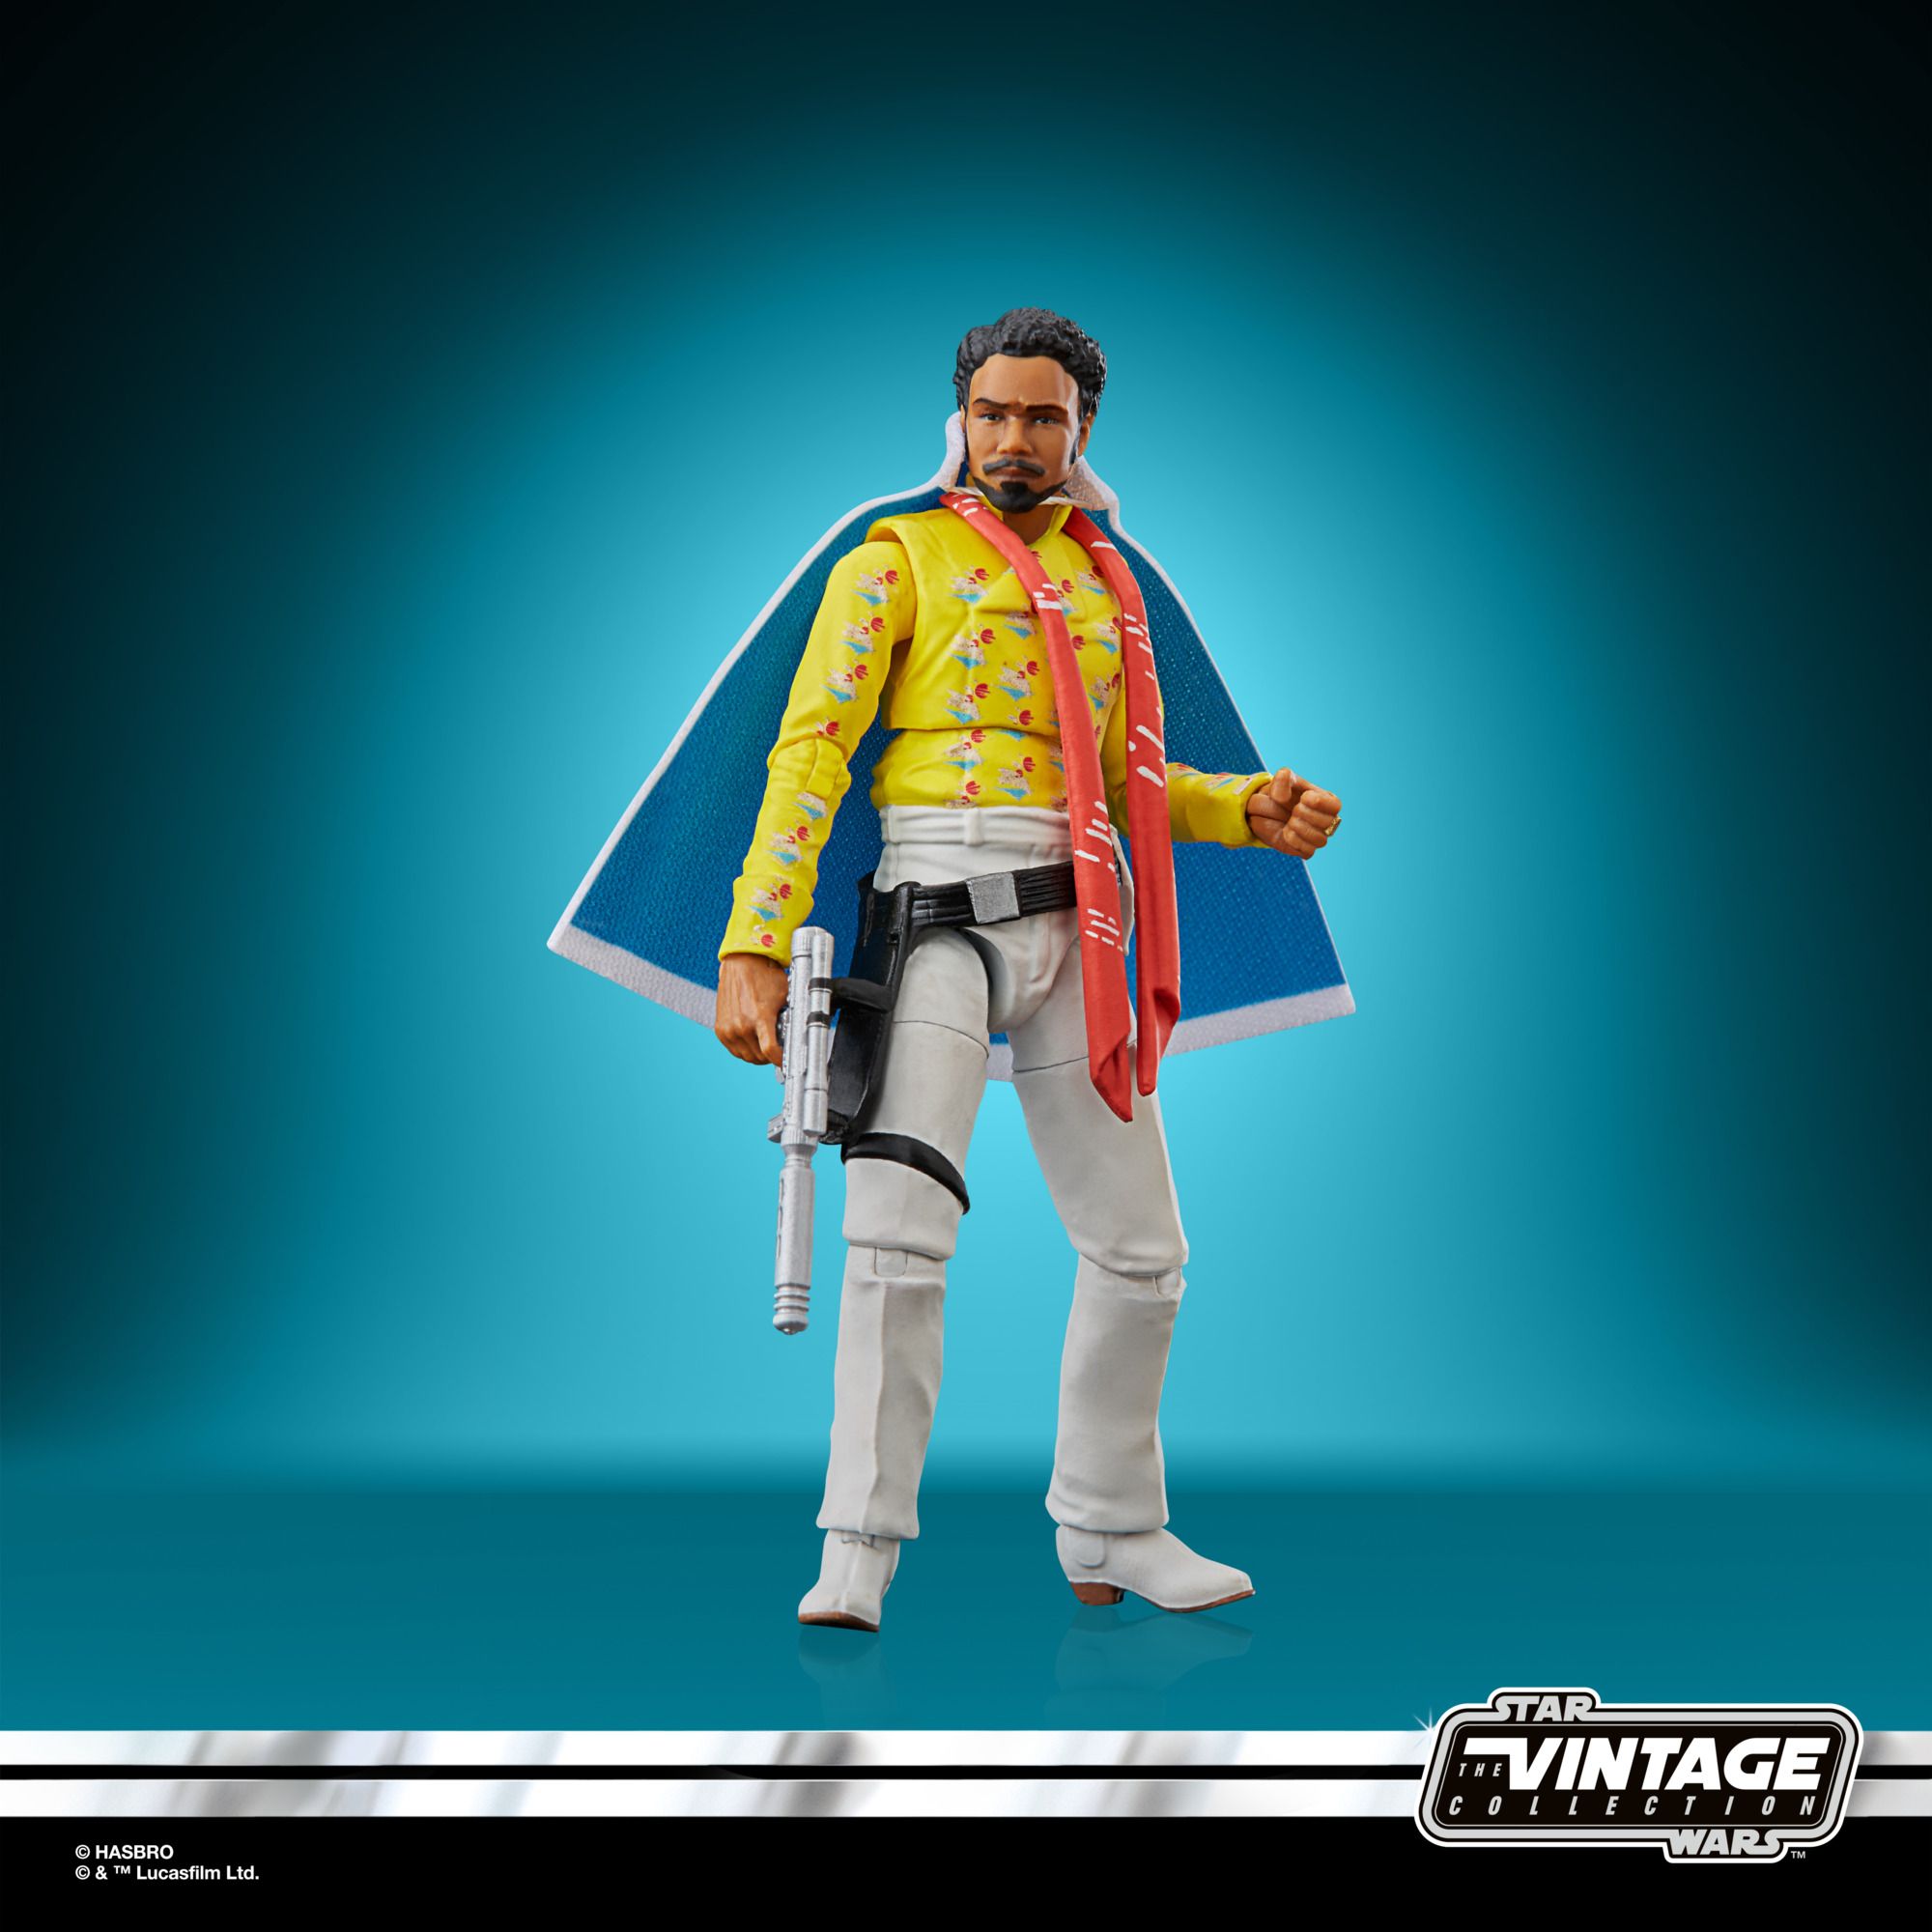 STAR WARS THE VINTAGE COLLECTION 3.75-INCH GAMING GREATS LANDO CALRISSIAN Figure 2